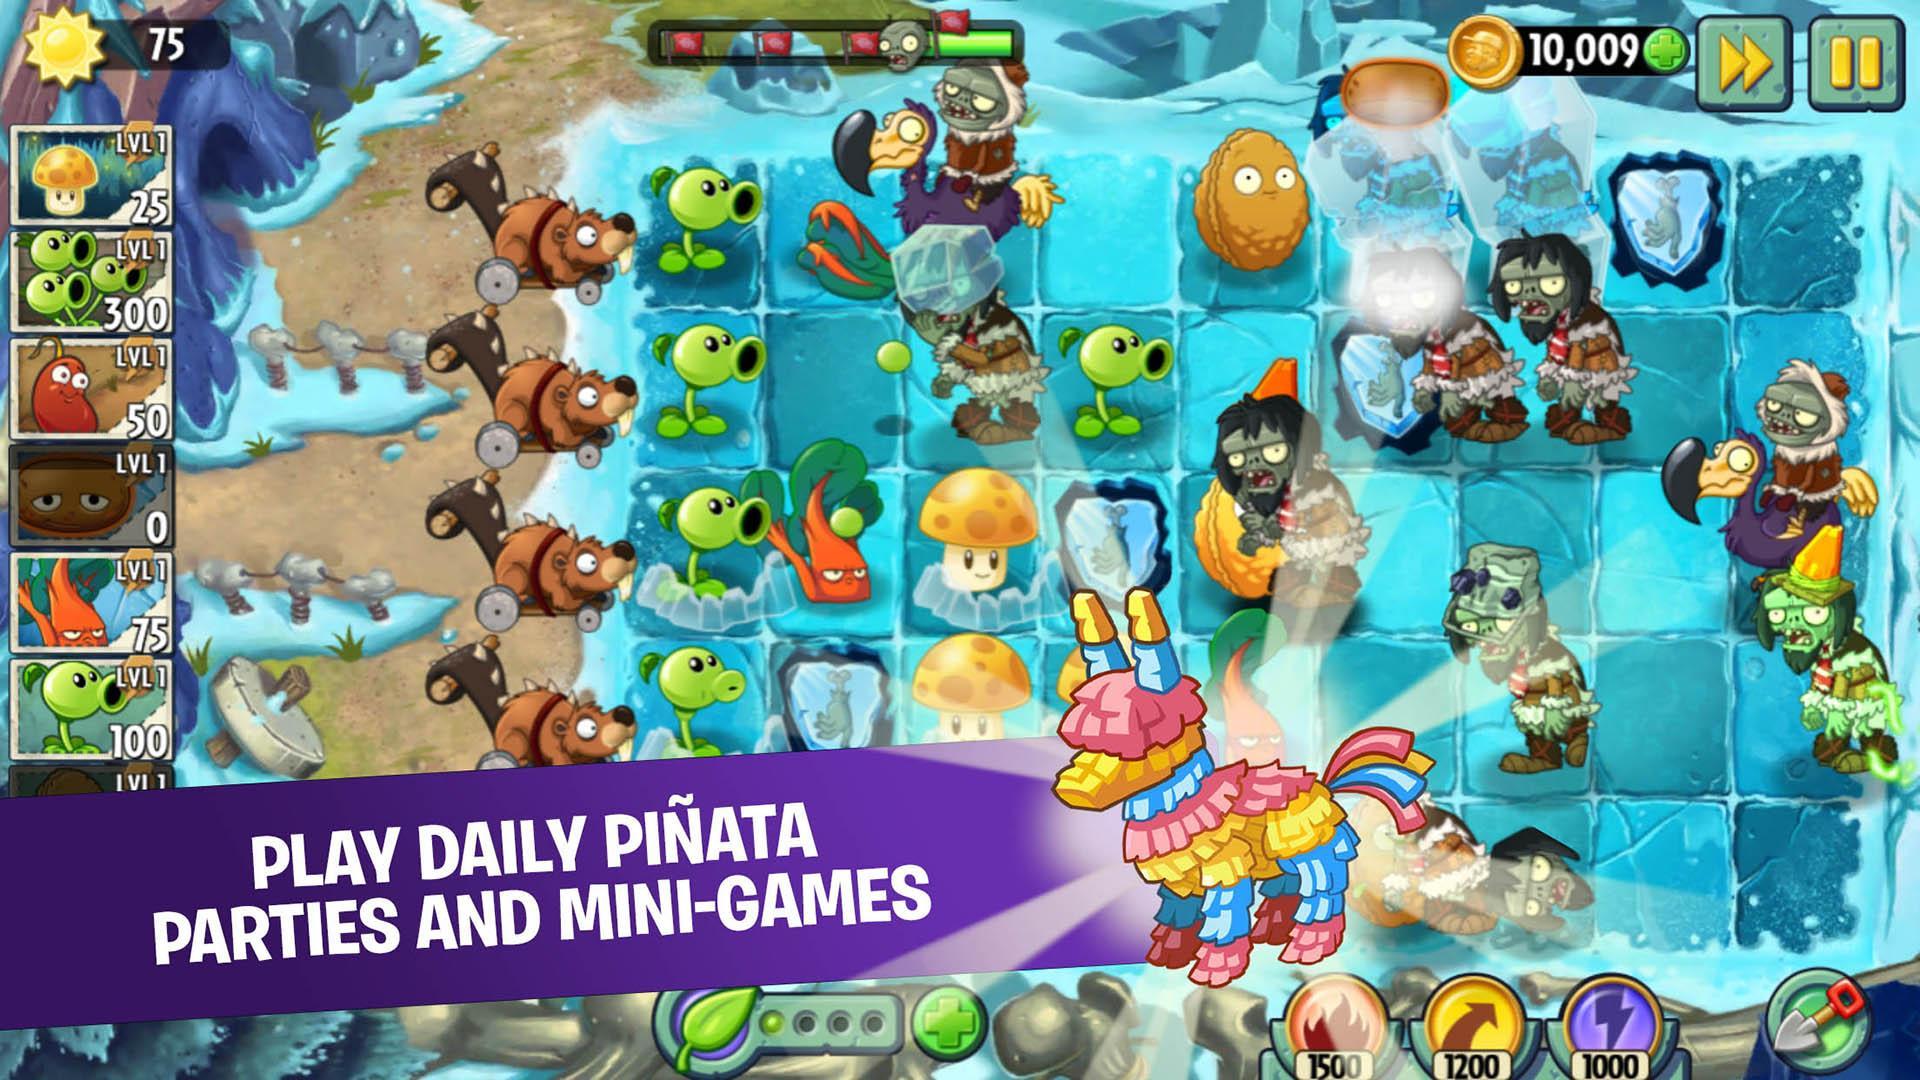 Plants Vs Zombies 2 Free For Android Apk Download